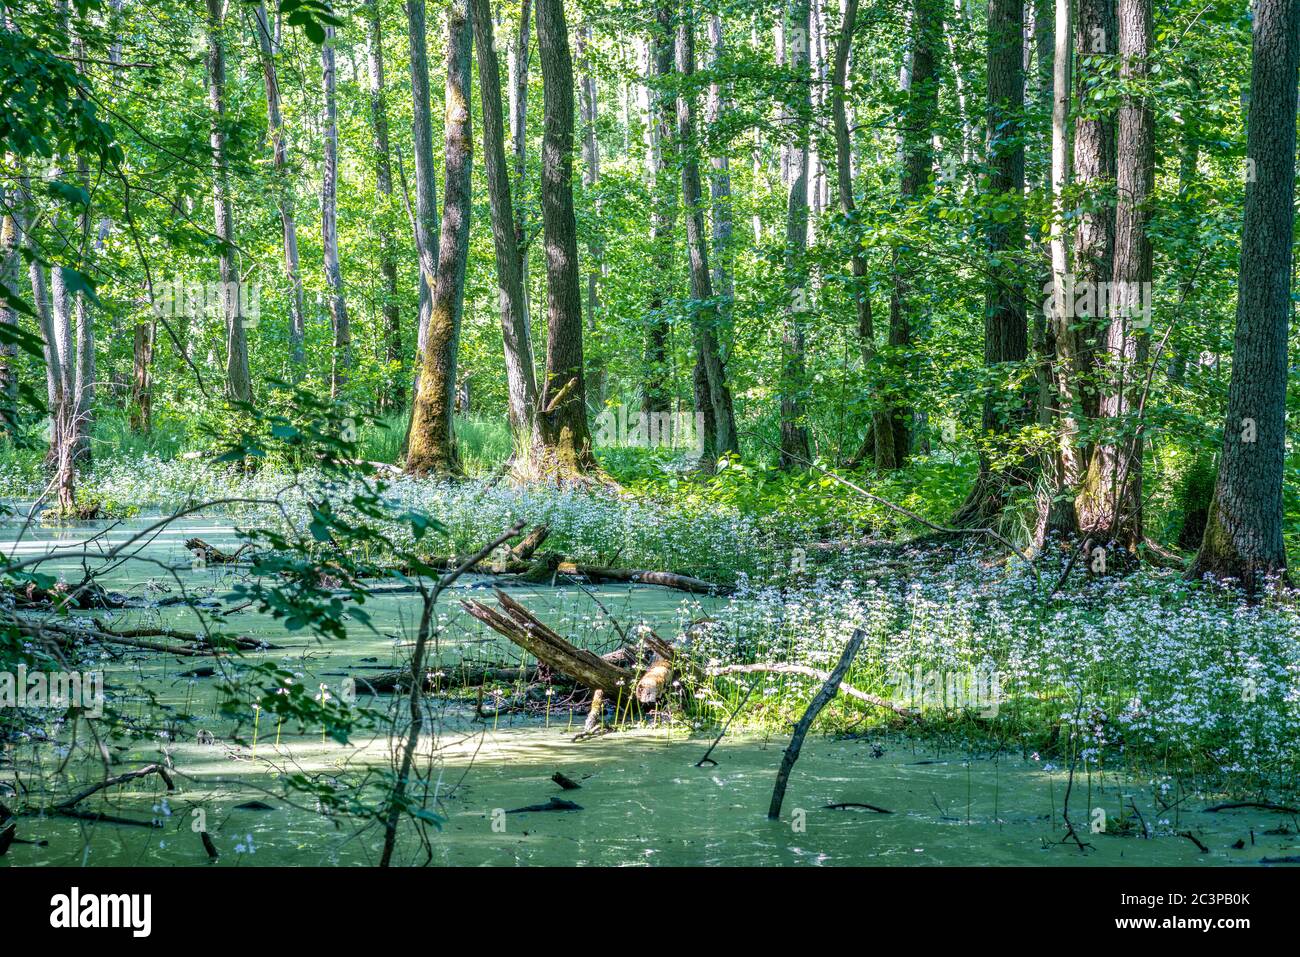 Lush green trees and white flowers in a swamp with lots of duckweed Stock Photo